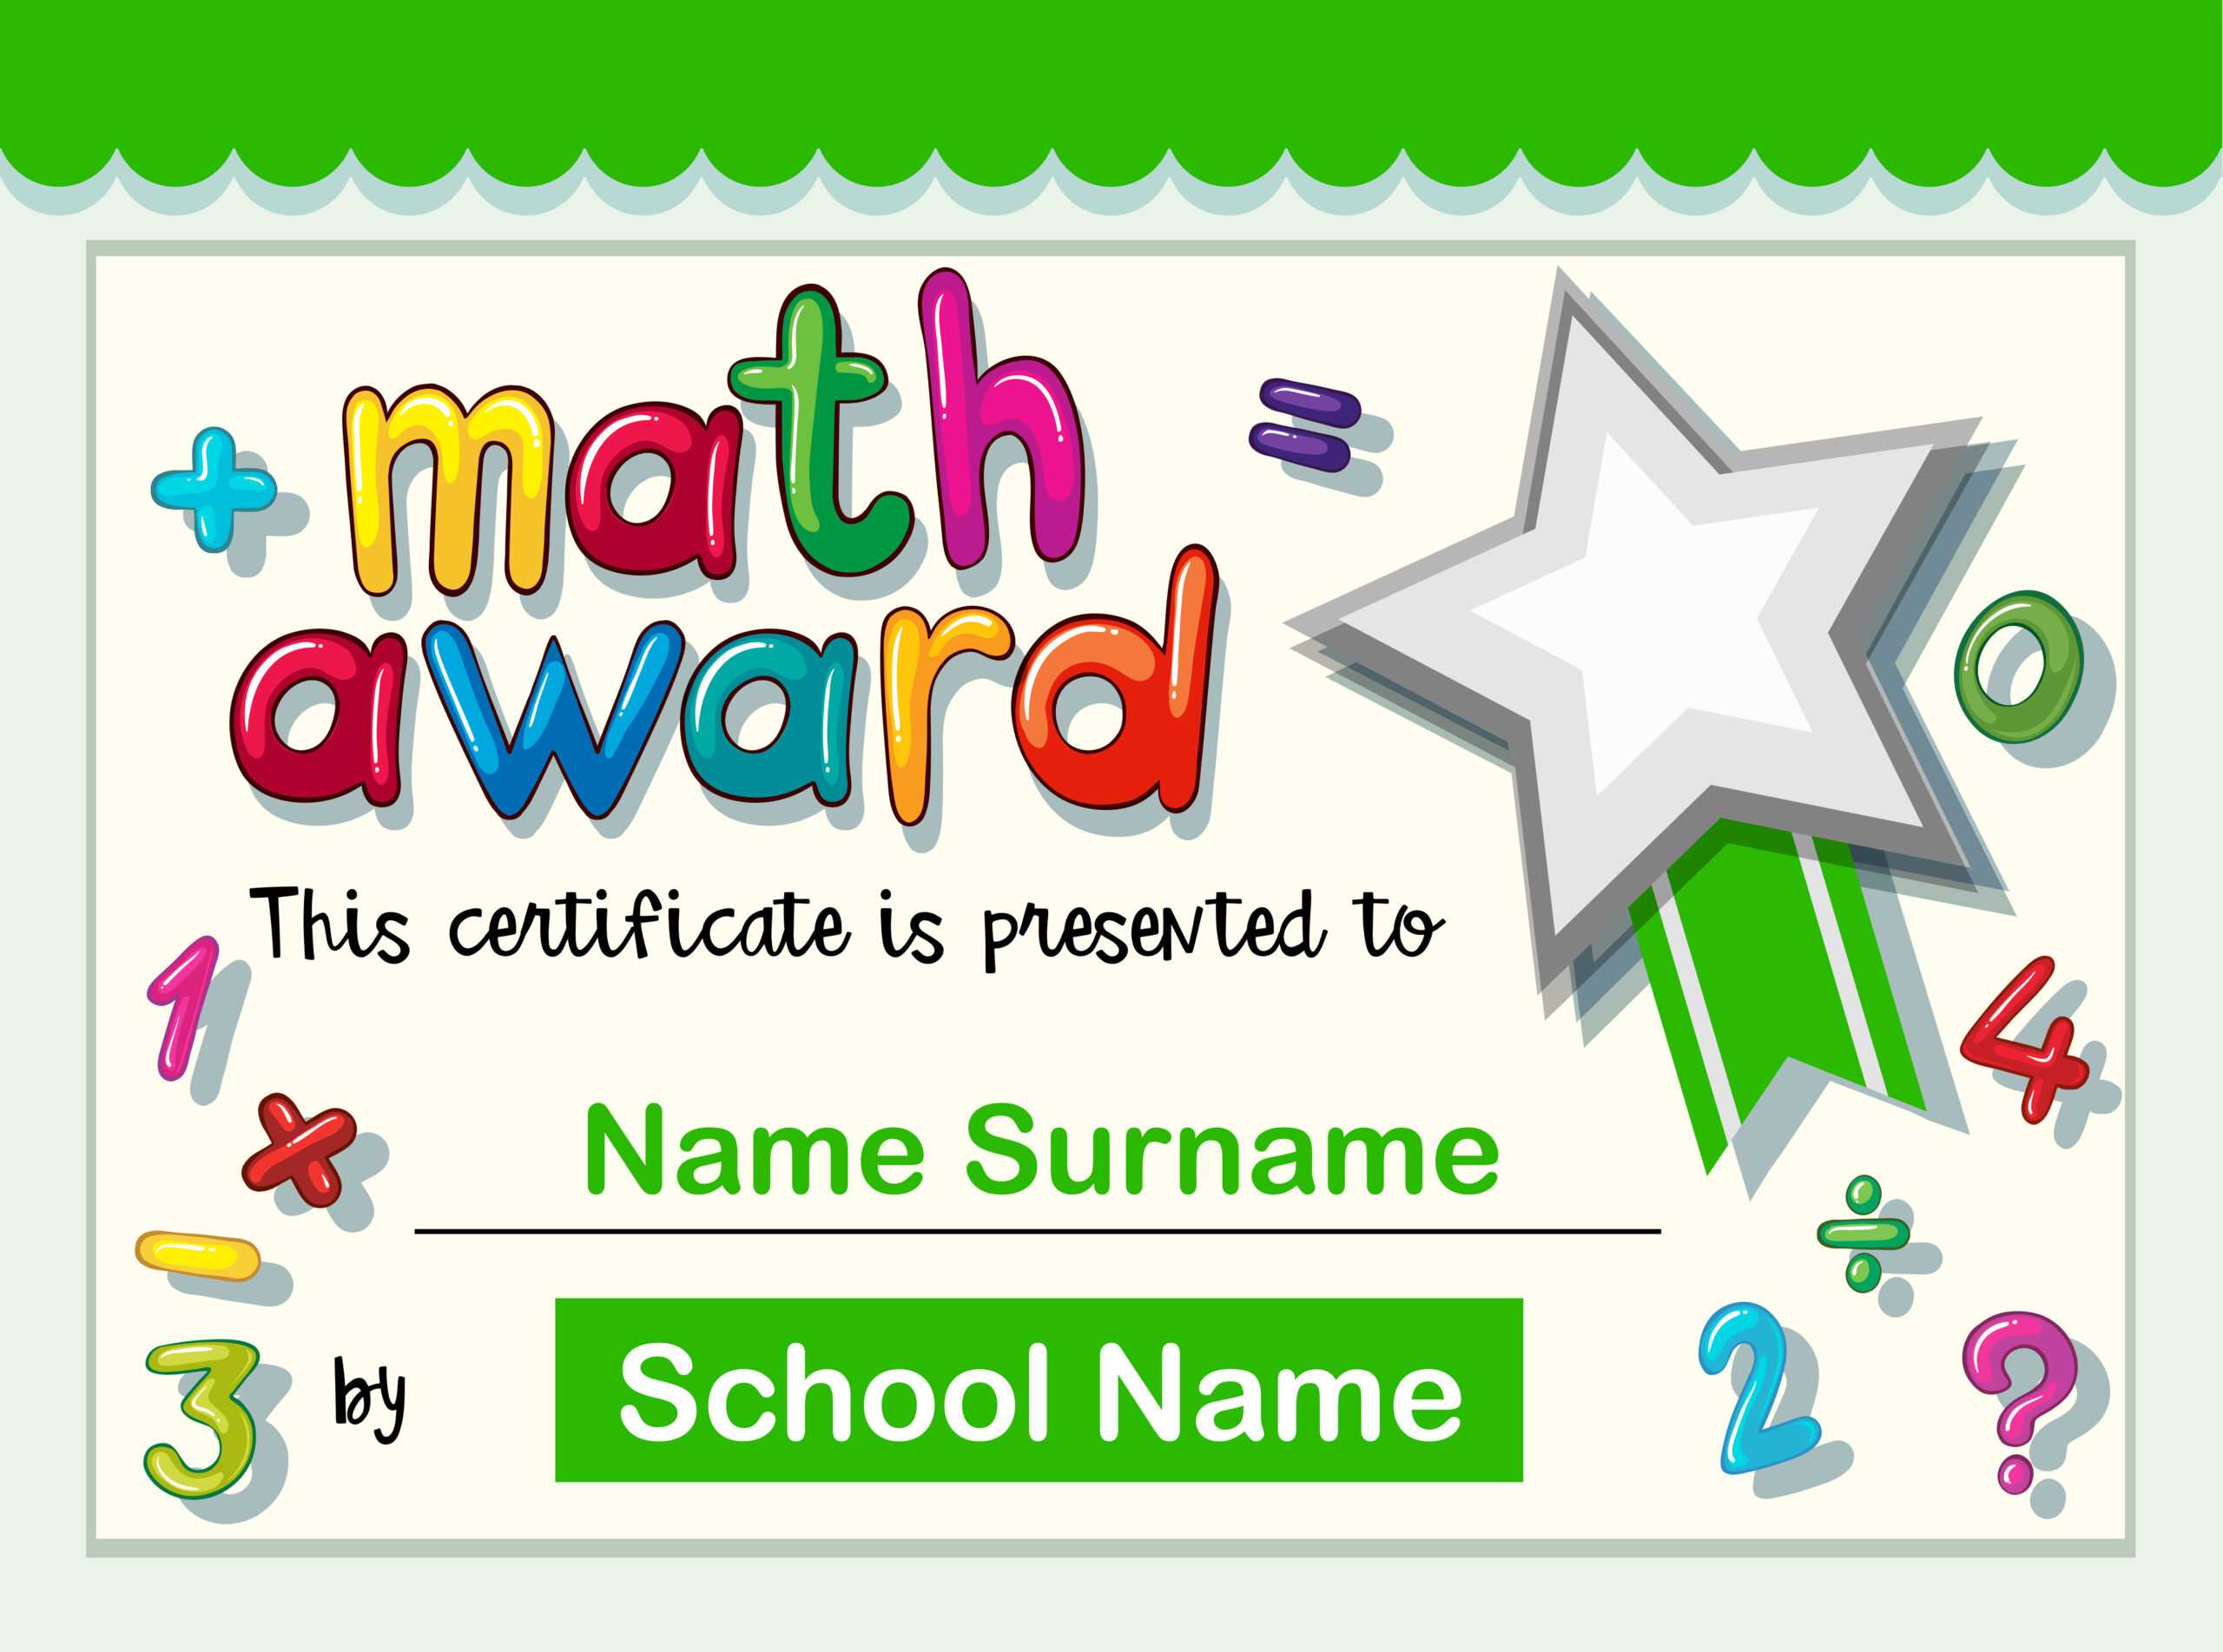 Certificate Template For Math Award – Download Free Vectors For Star Award Certificate Template